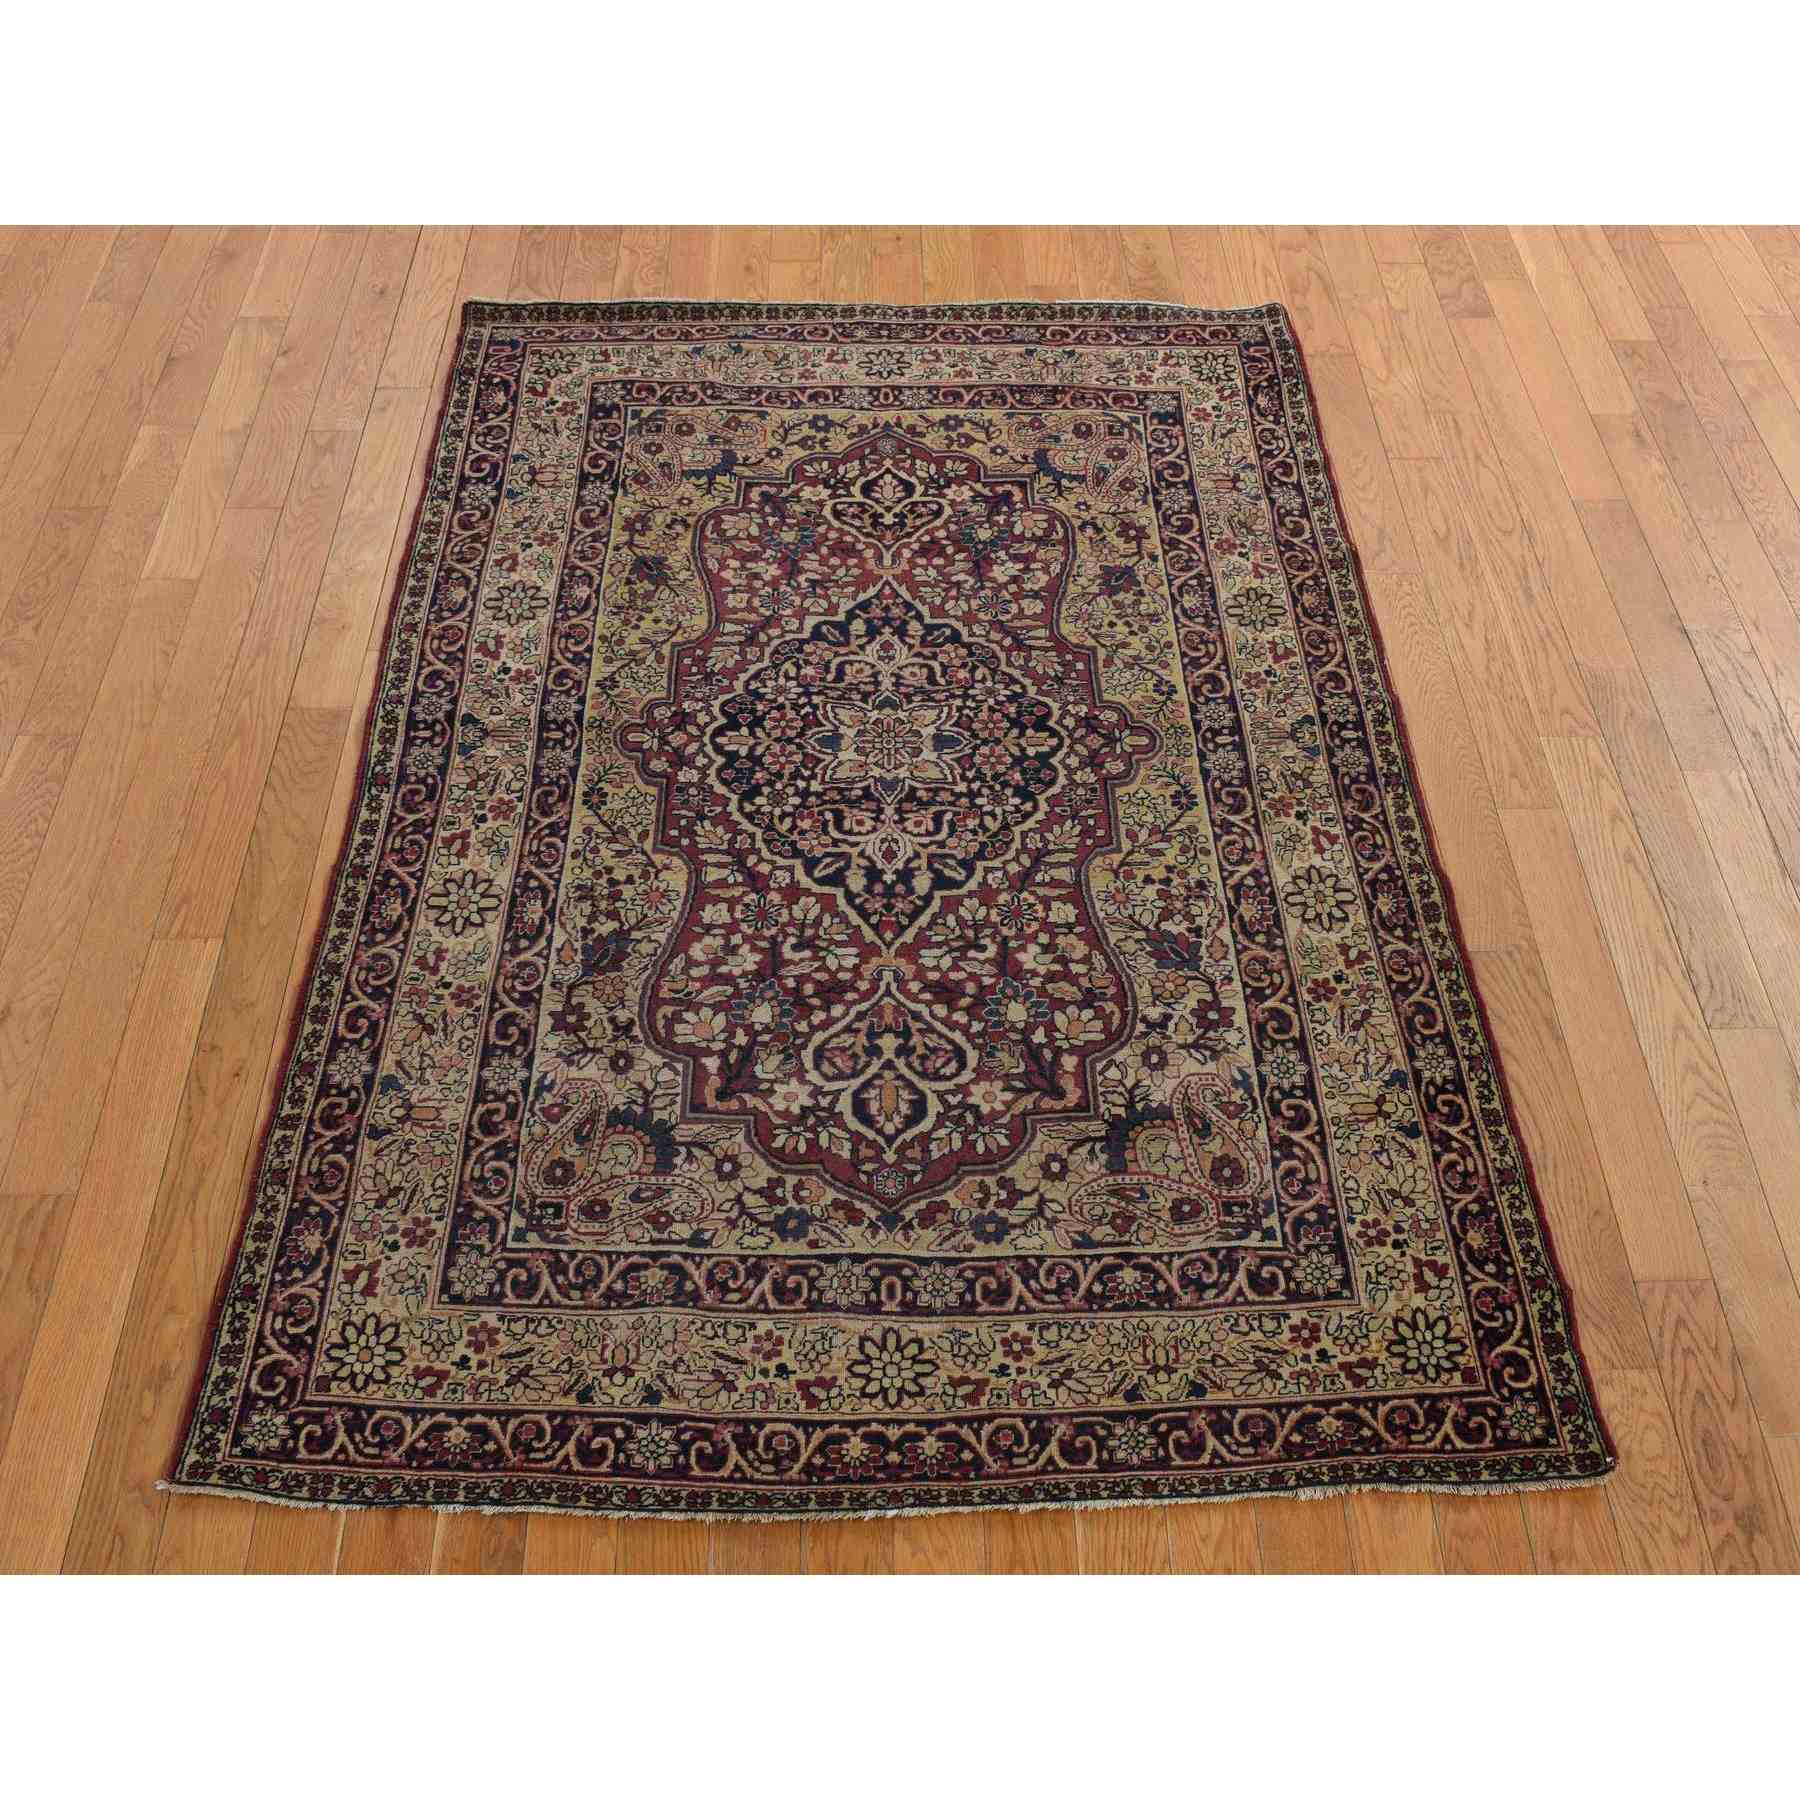 Antique-Hand-Knotted-Rug-390985